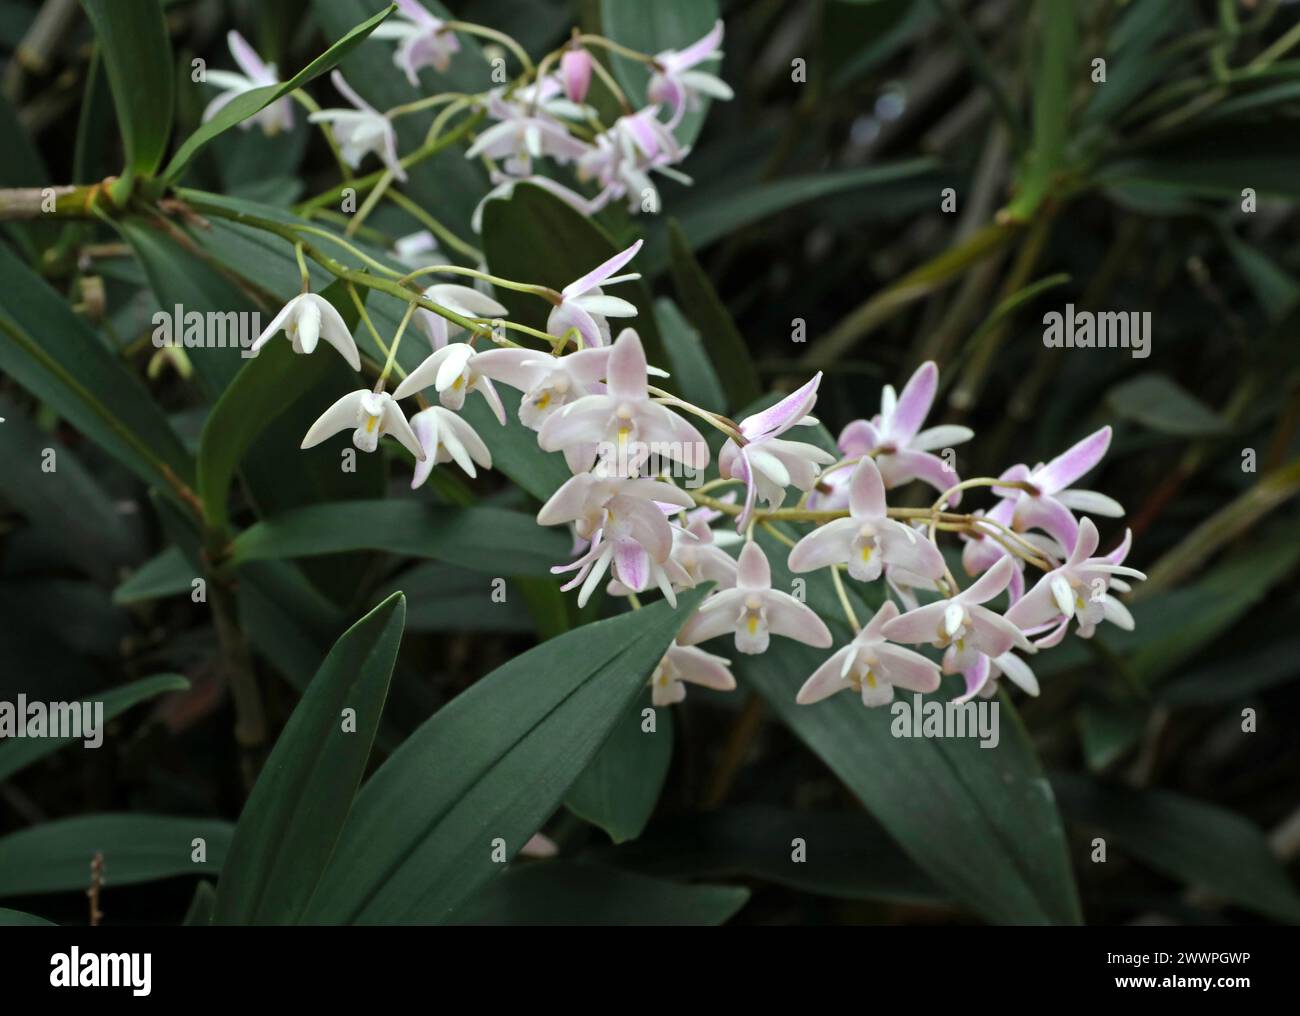 Orchid, Dendrobium delicatum, Dendrobiinae, Orchidaceae. Dendrobium is a genus of mostly epiphytic and lithophytic orchids. Stock Photo